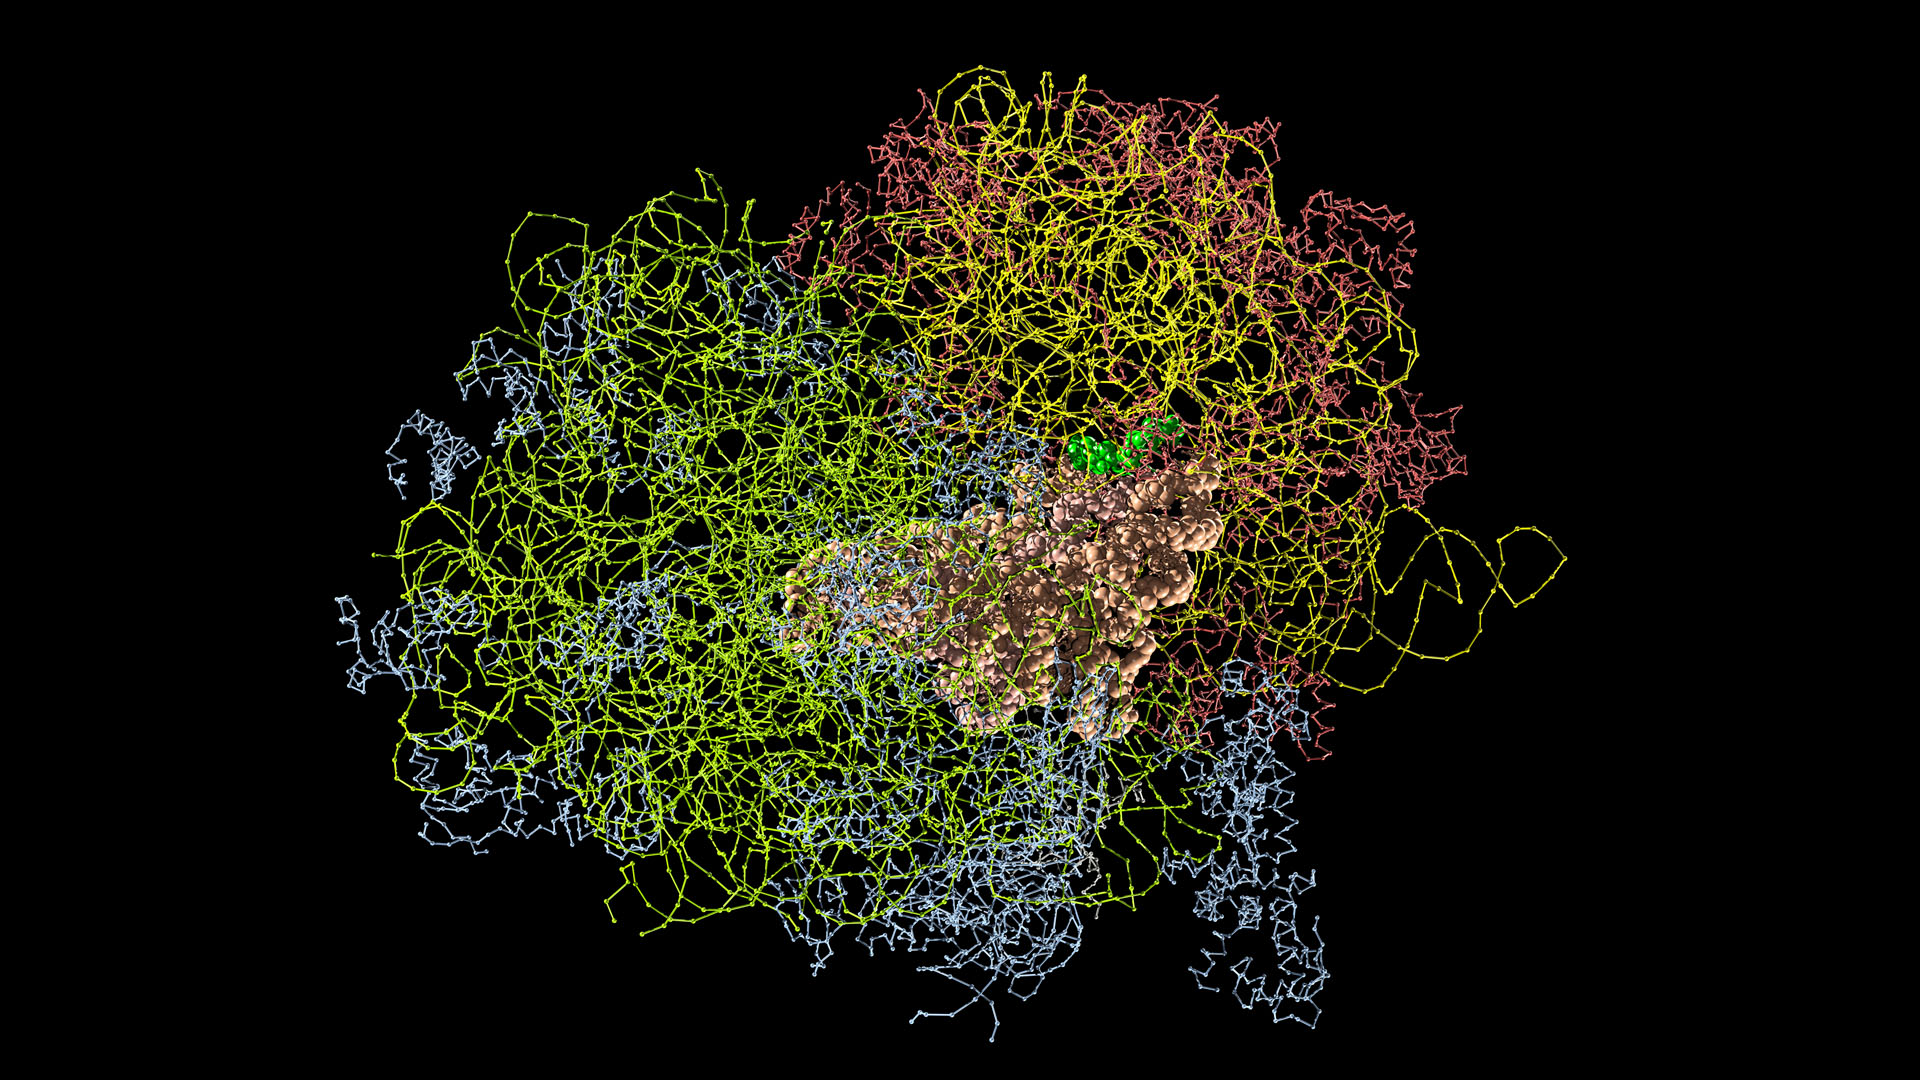 New Mouse Model for Defective-Ribosome Disease